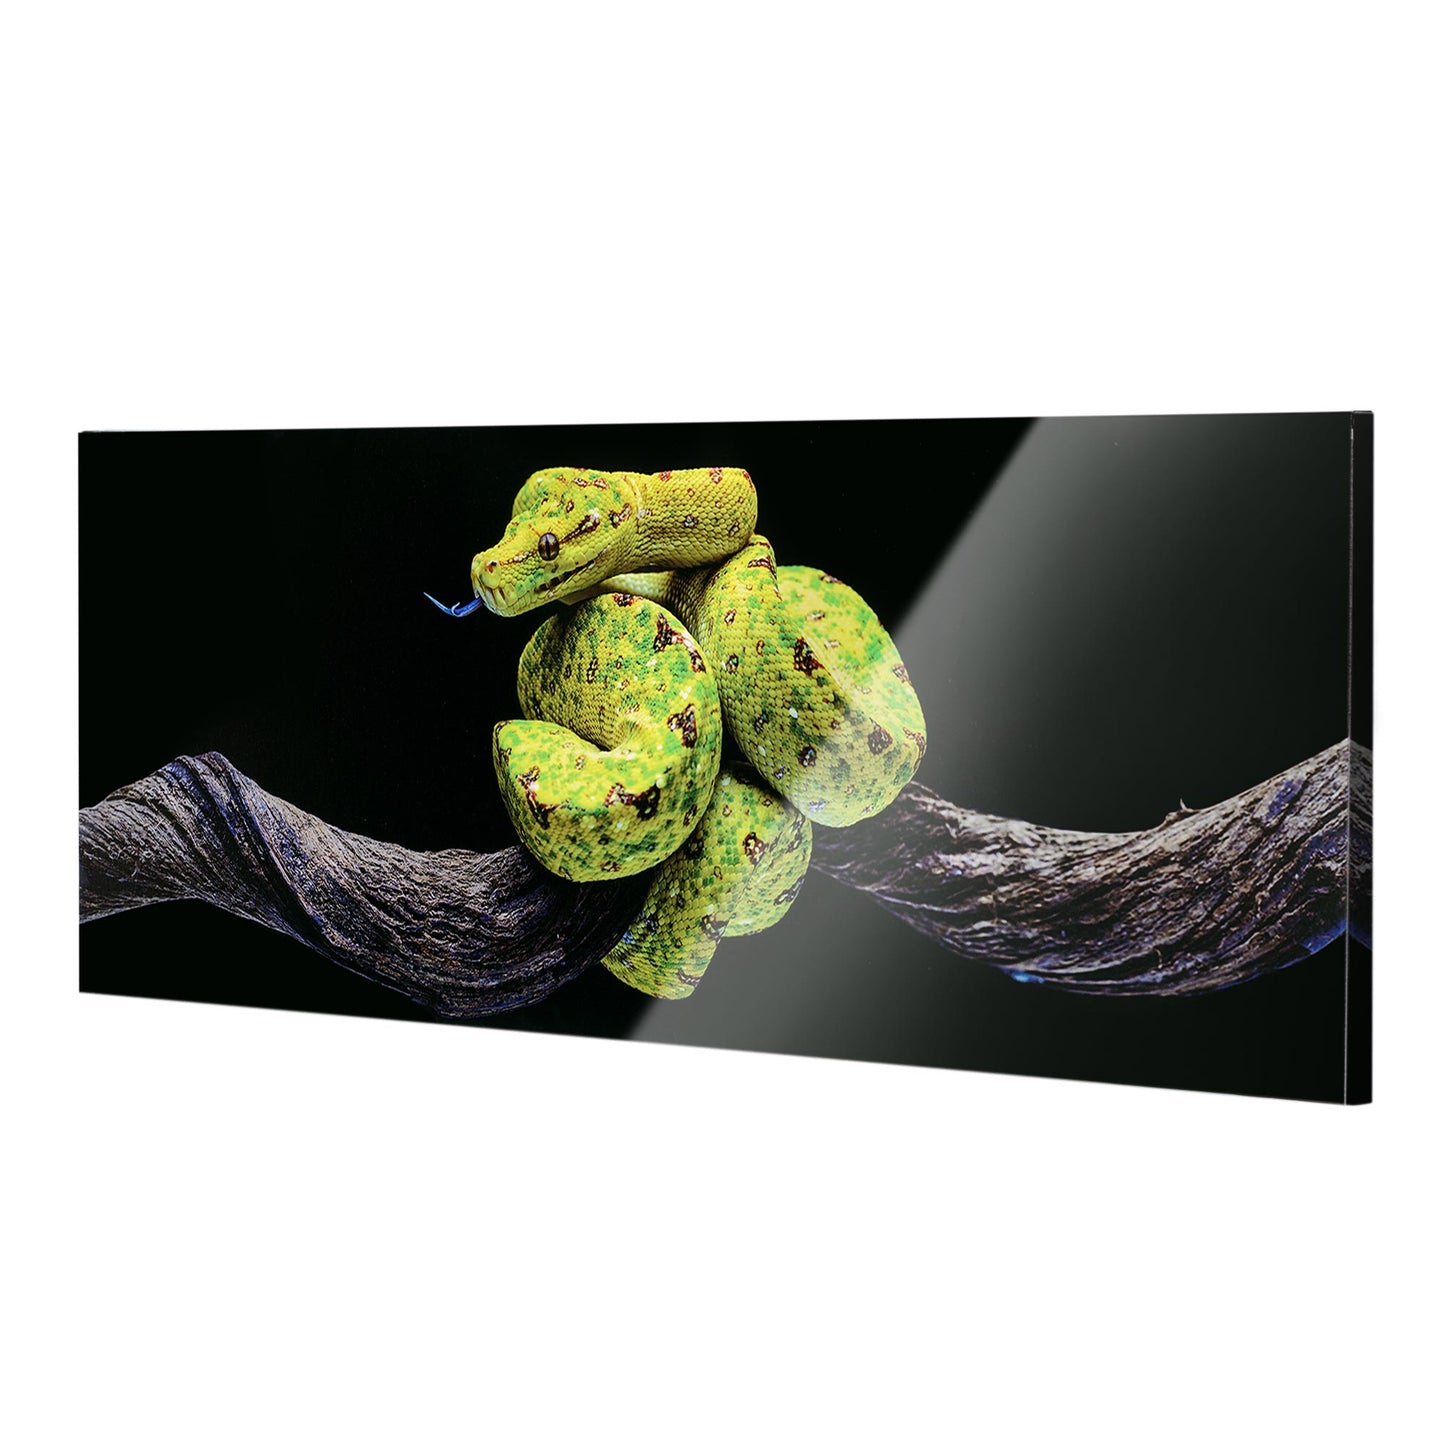 Green Tree Snake Glossy Lacquer Canvas Wall Art Print Panel, 48" x 18"